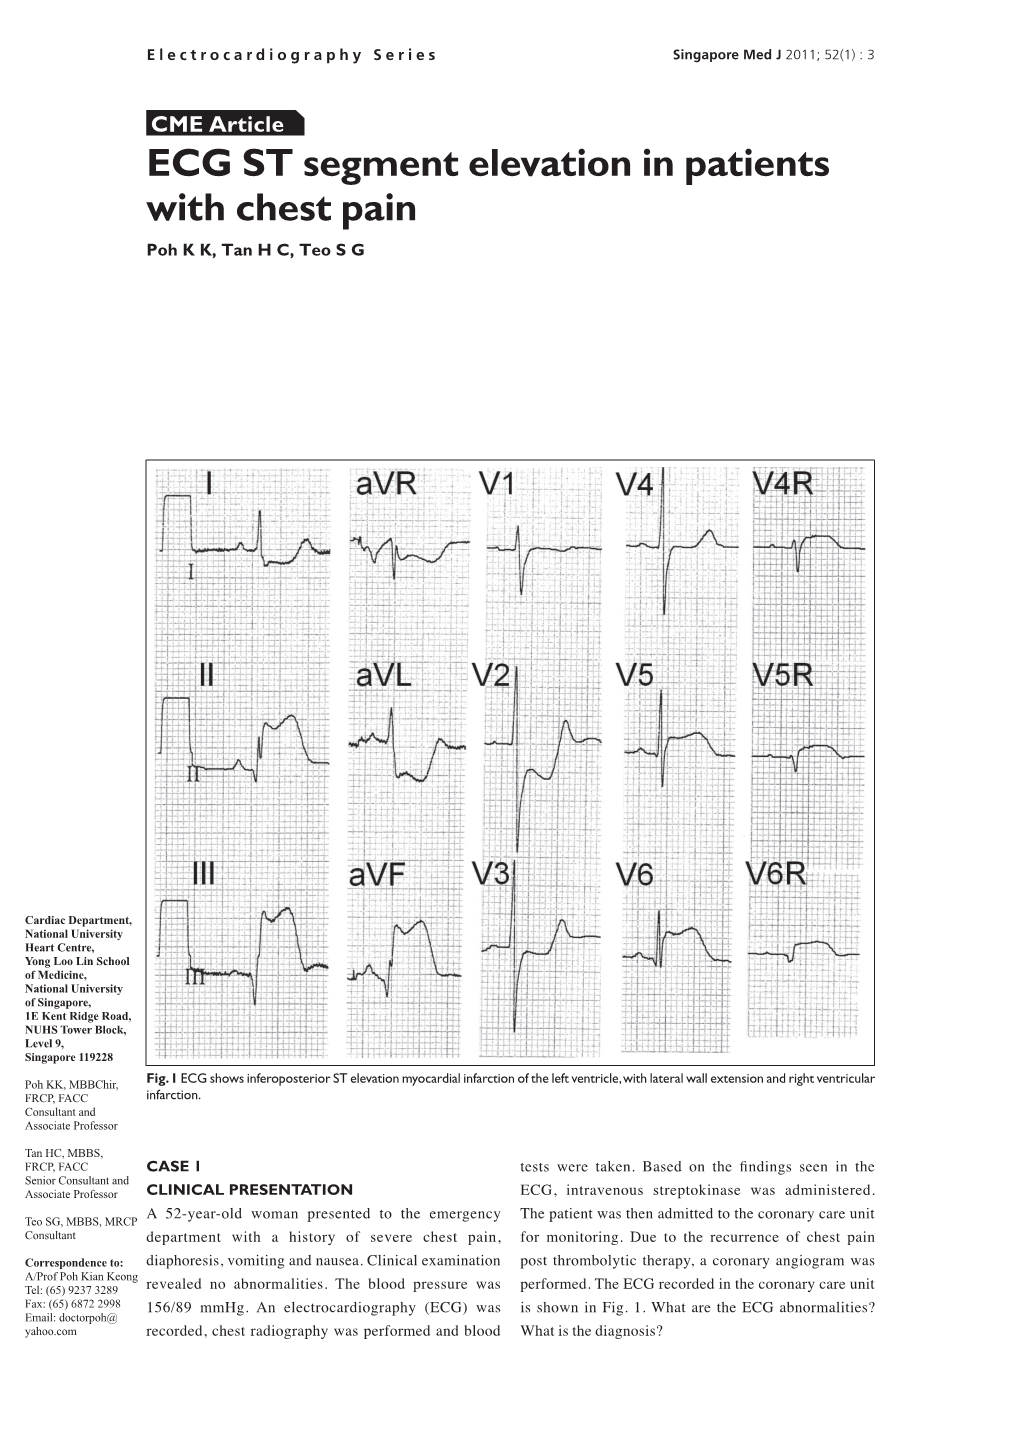 ECG ST Segment Elevation in Patients with Chest Pain Poh K K, Tan H C, Teo S G